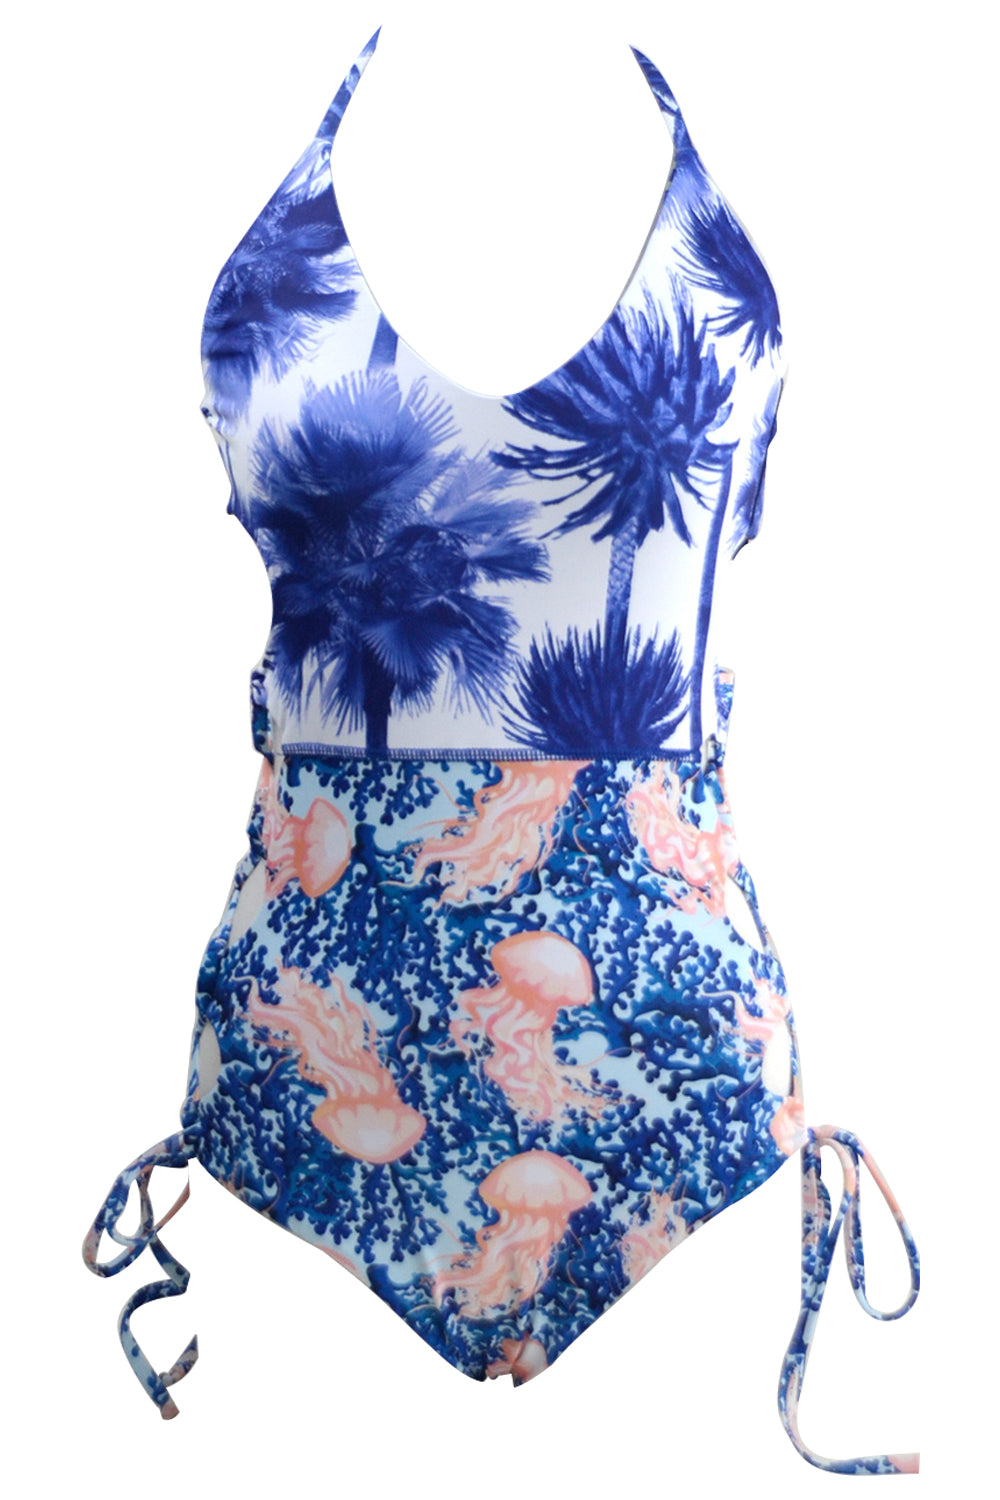 Iyasson Coconut Tree Ocean Lace Up One-piece Swimsuit